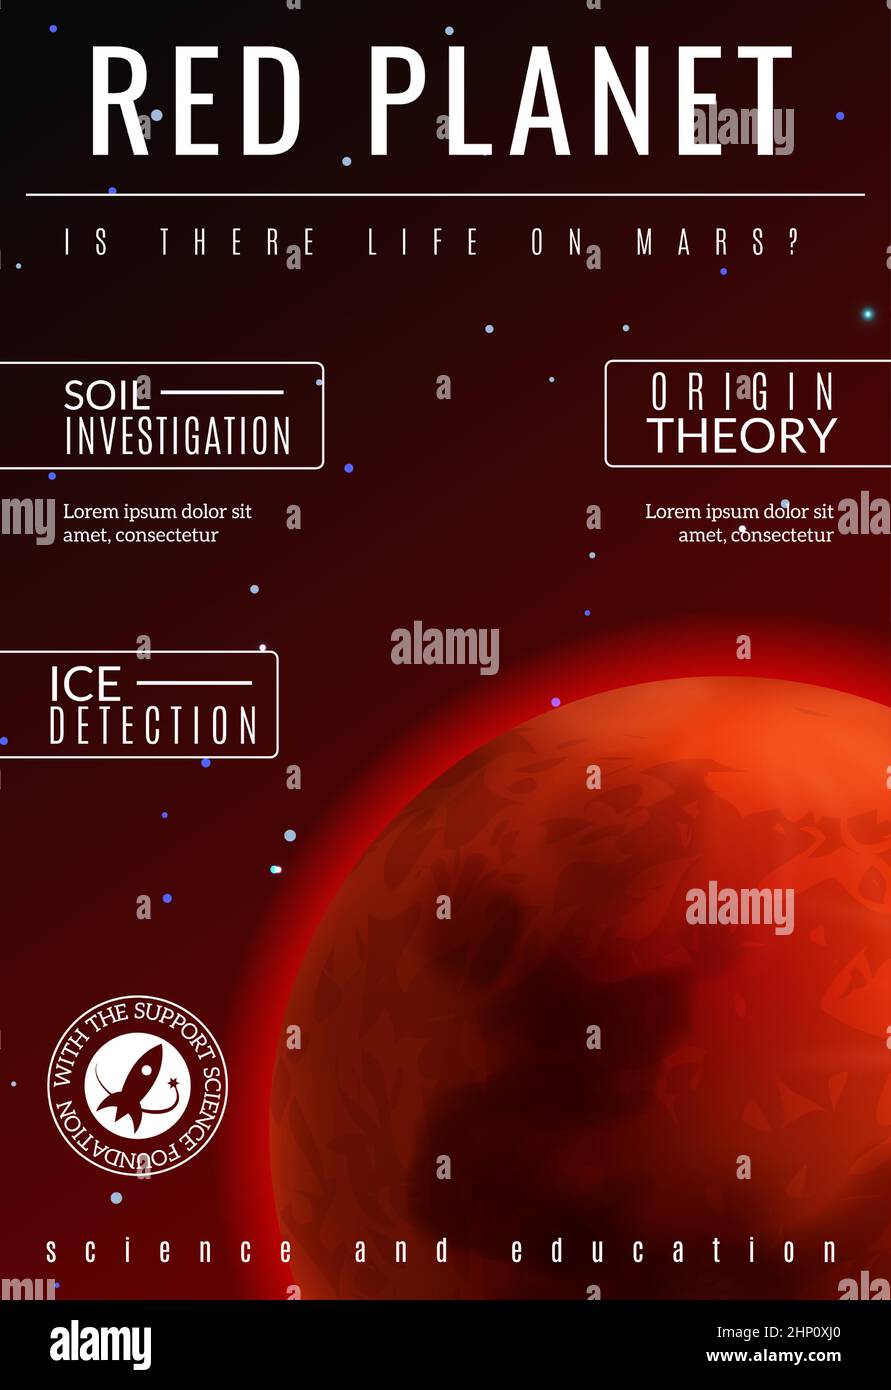 Red planet poster. Astronomy education banner template Stock Vector